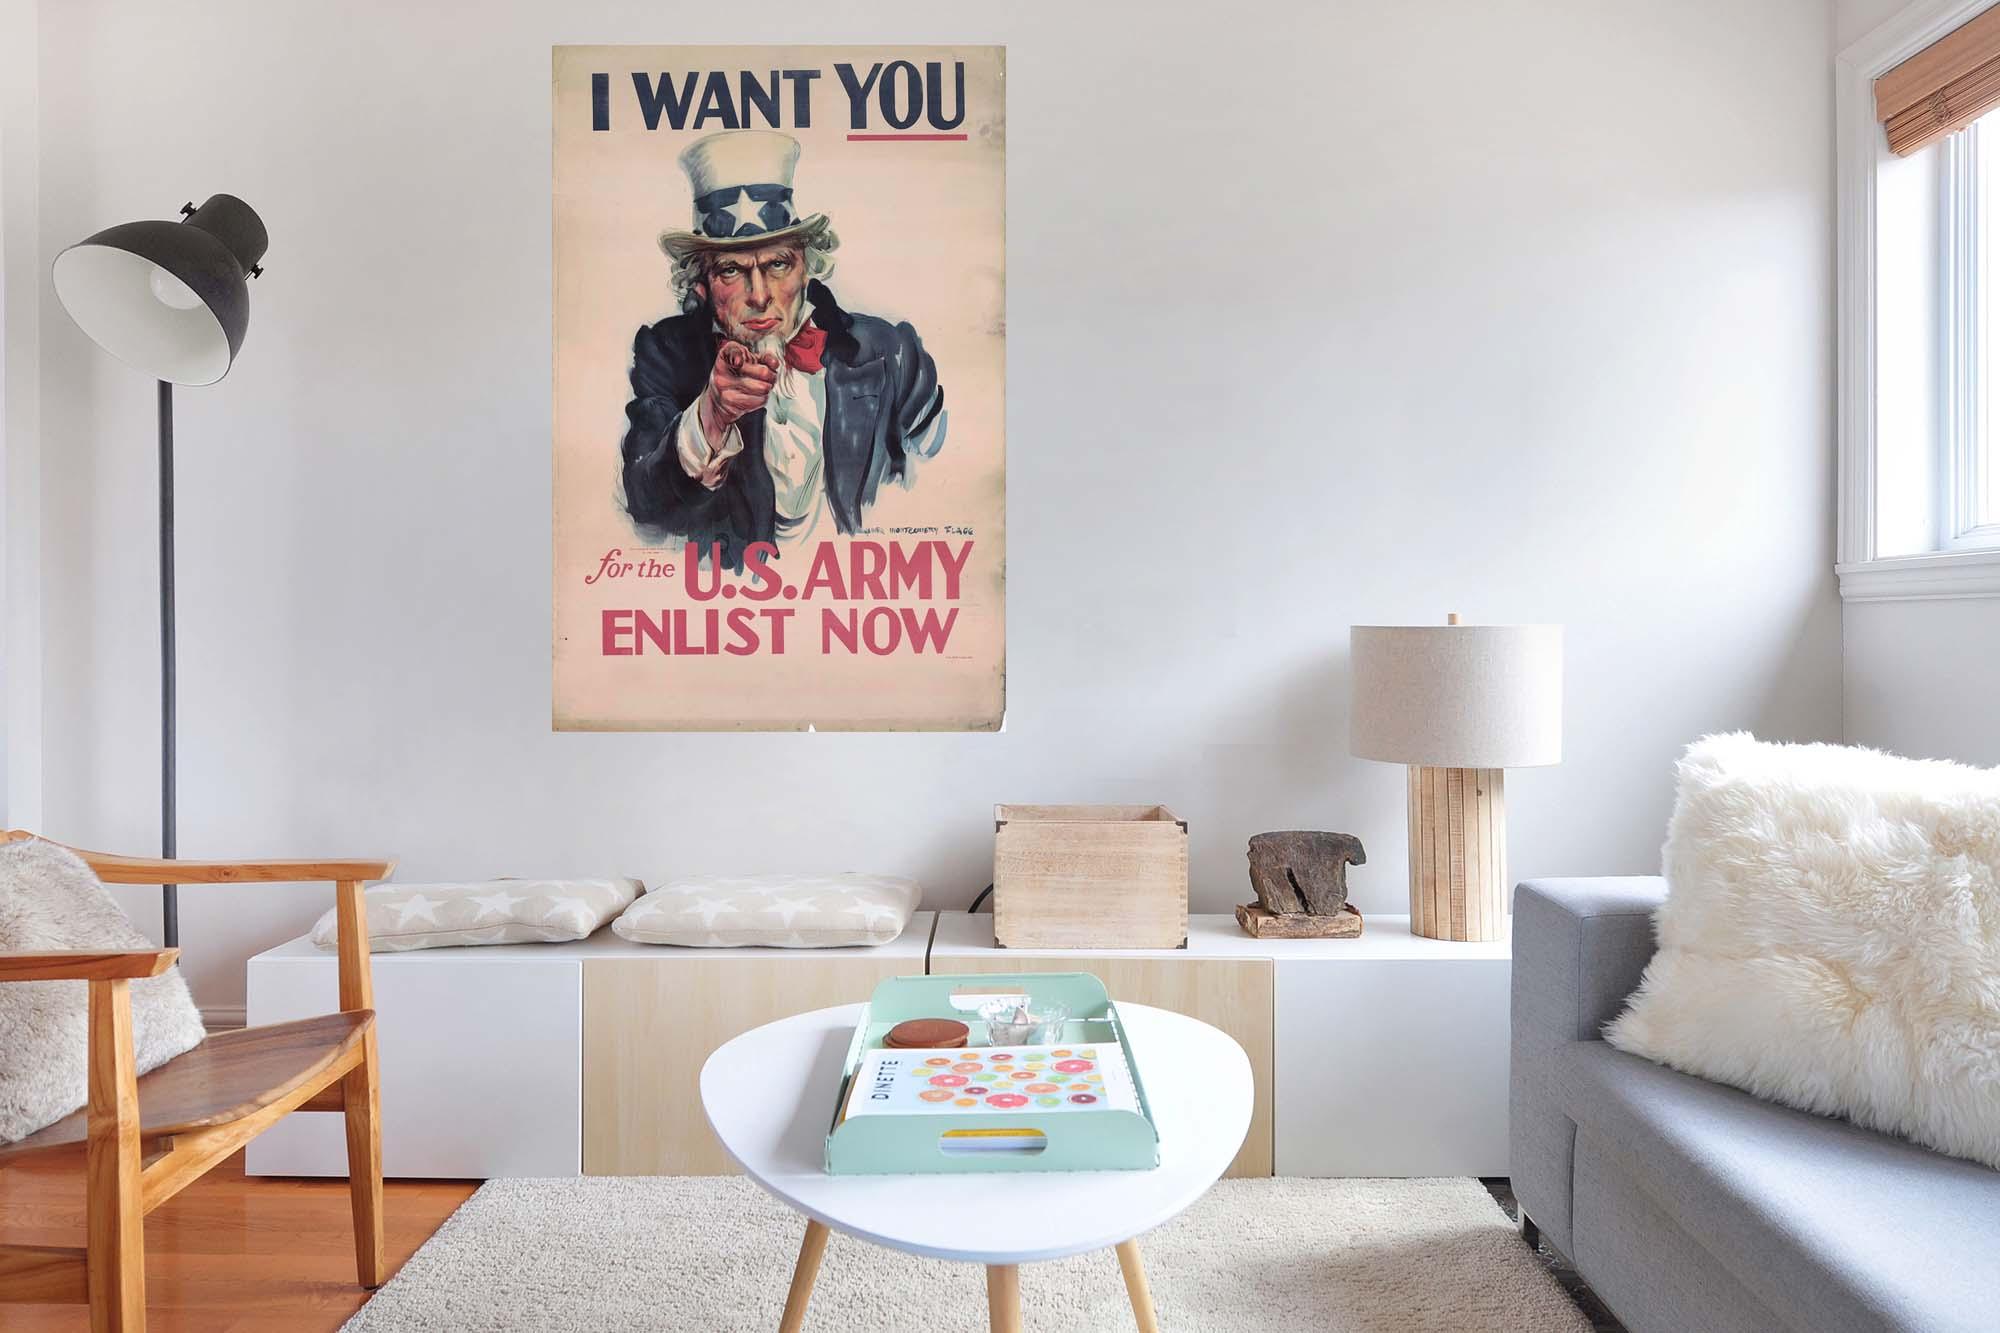 CoolWalls.ca diecut I Want You (No Border) Vintage Poster, Wall Decal Sticker Wallpaper, PEEL-N-STICK, removable anytime. Great for a classroom